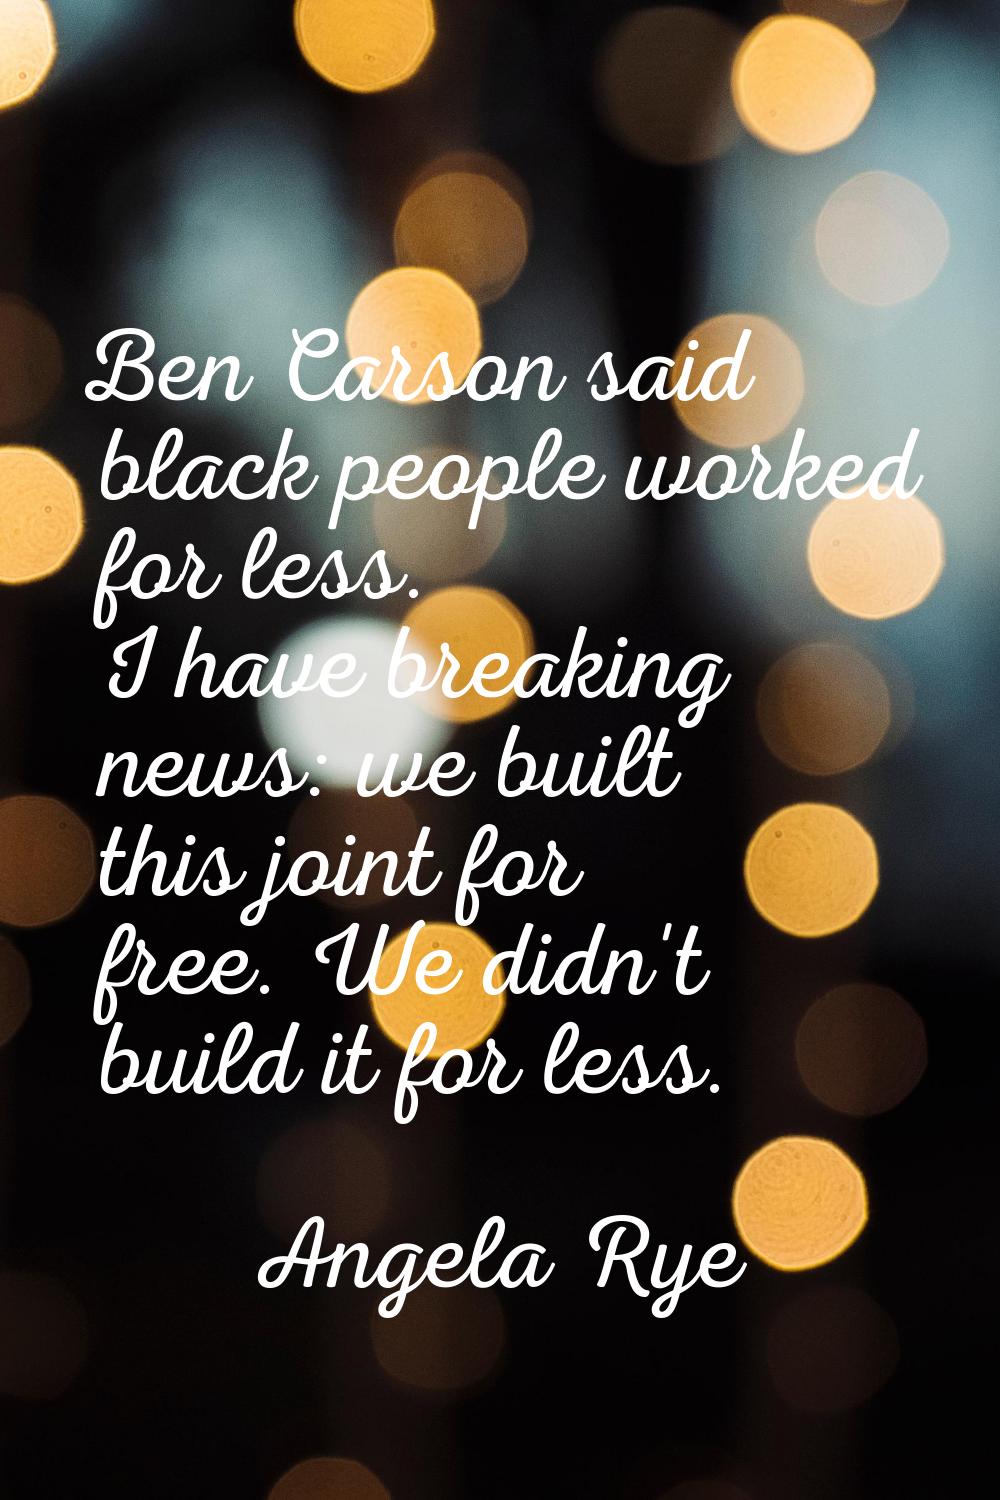 Ben Carson said black people worked for less. I have breaking news: we built this joint for free. W